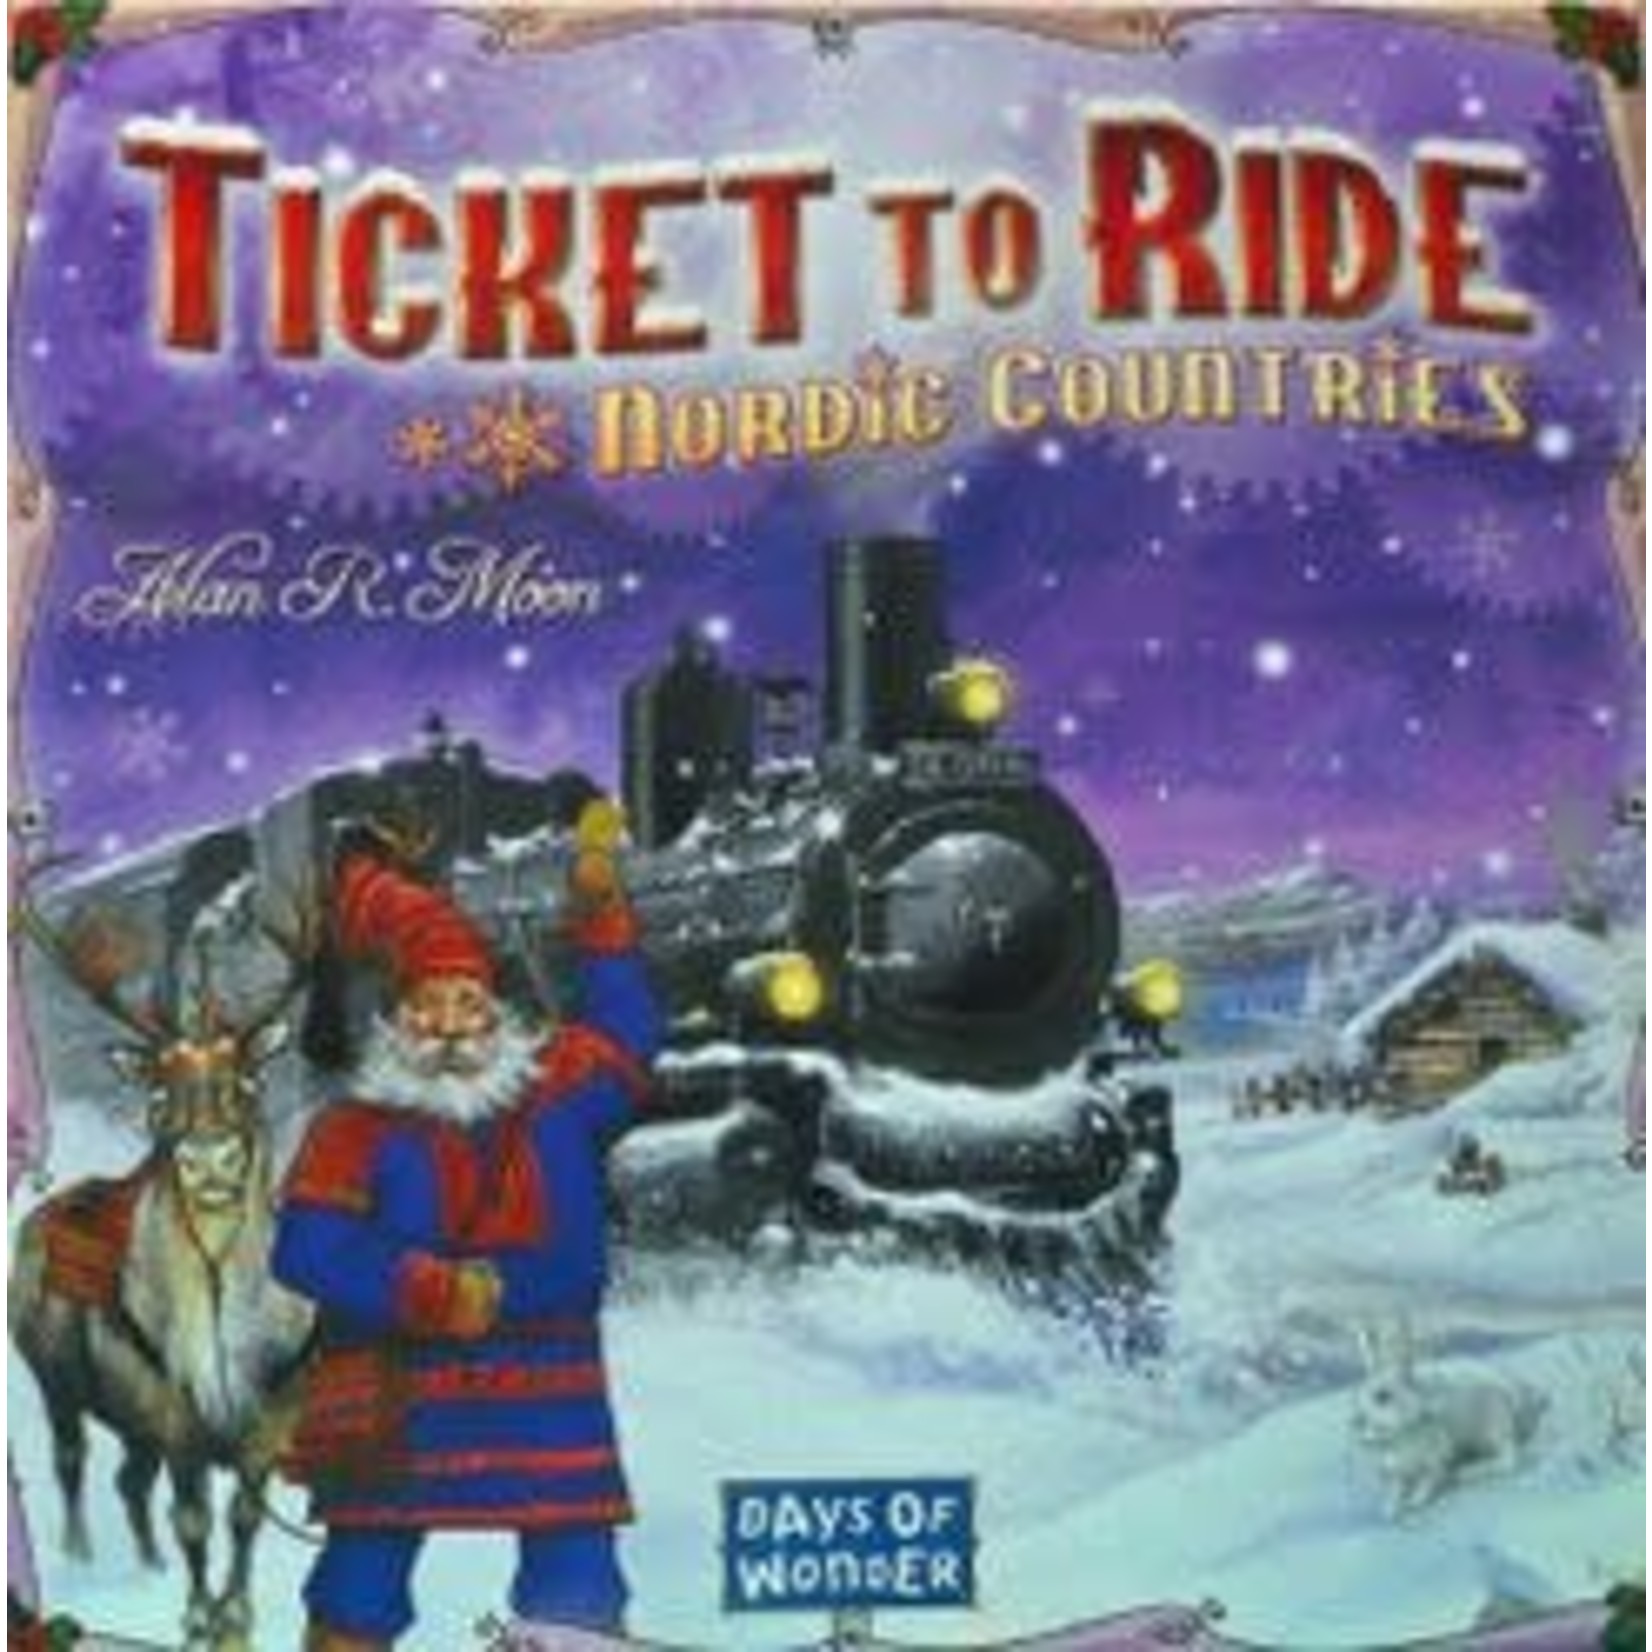 Ticket to Ride: Nordic Countries Board Game